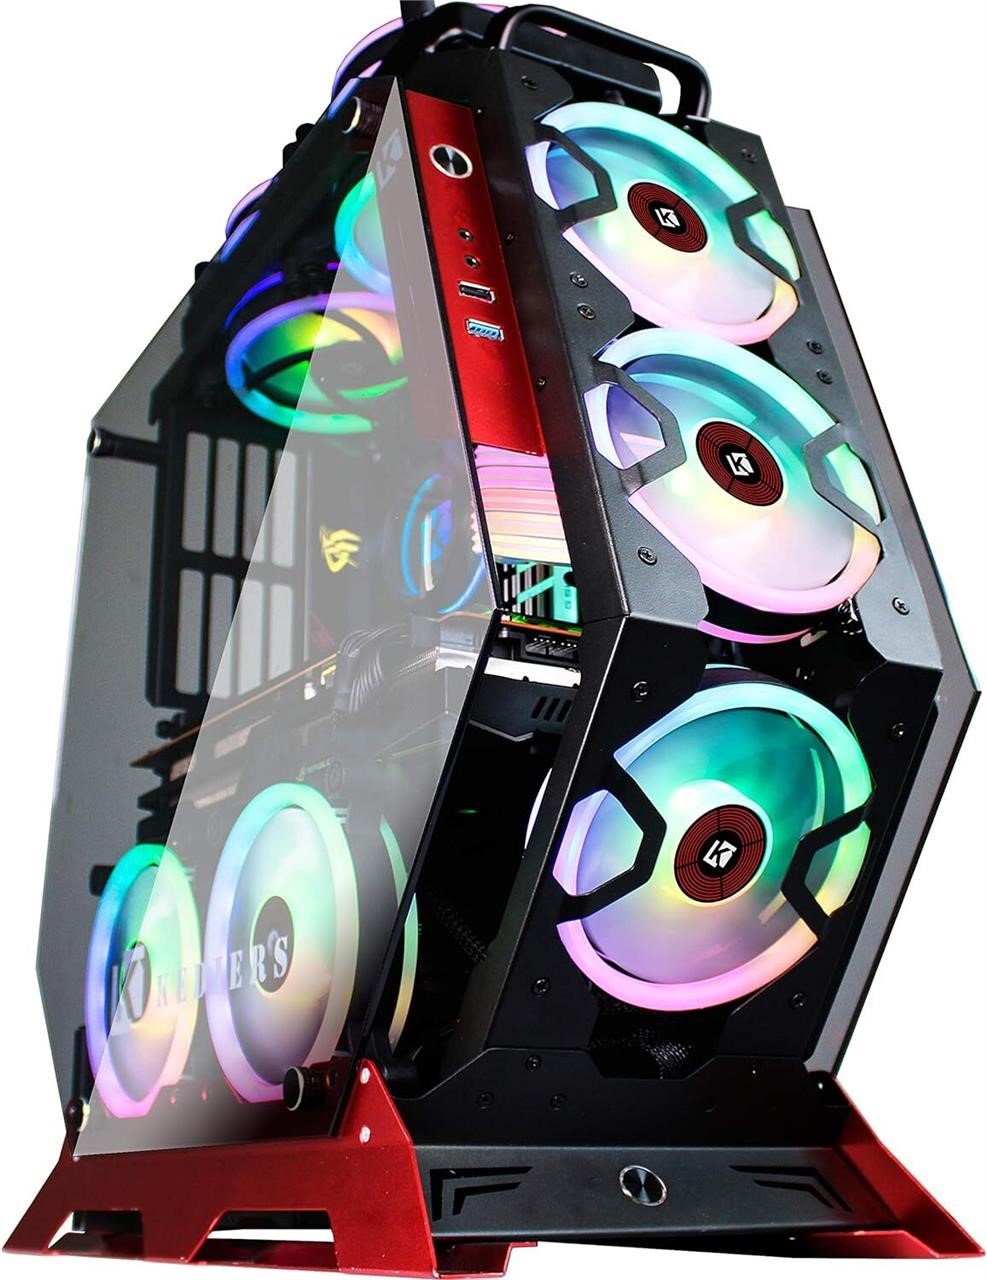 KEDIERS PC Case ATX Mid Tower C570 Knight Series